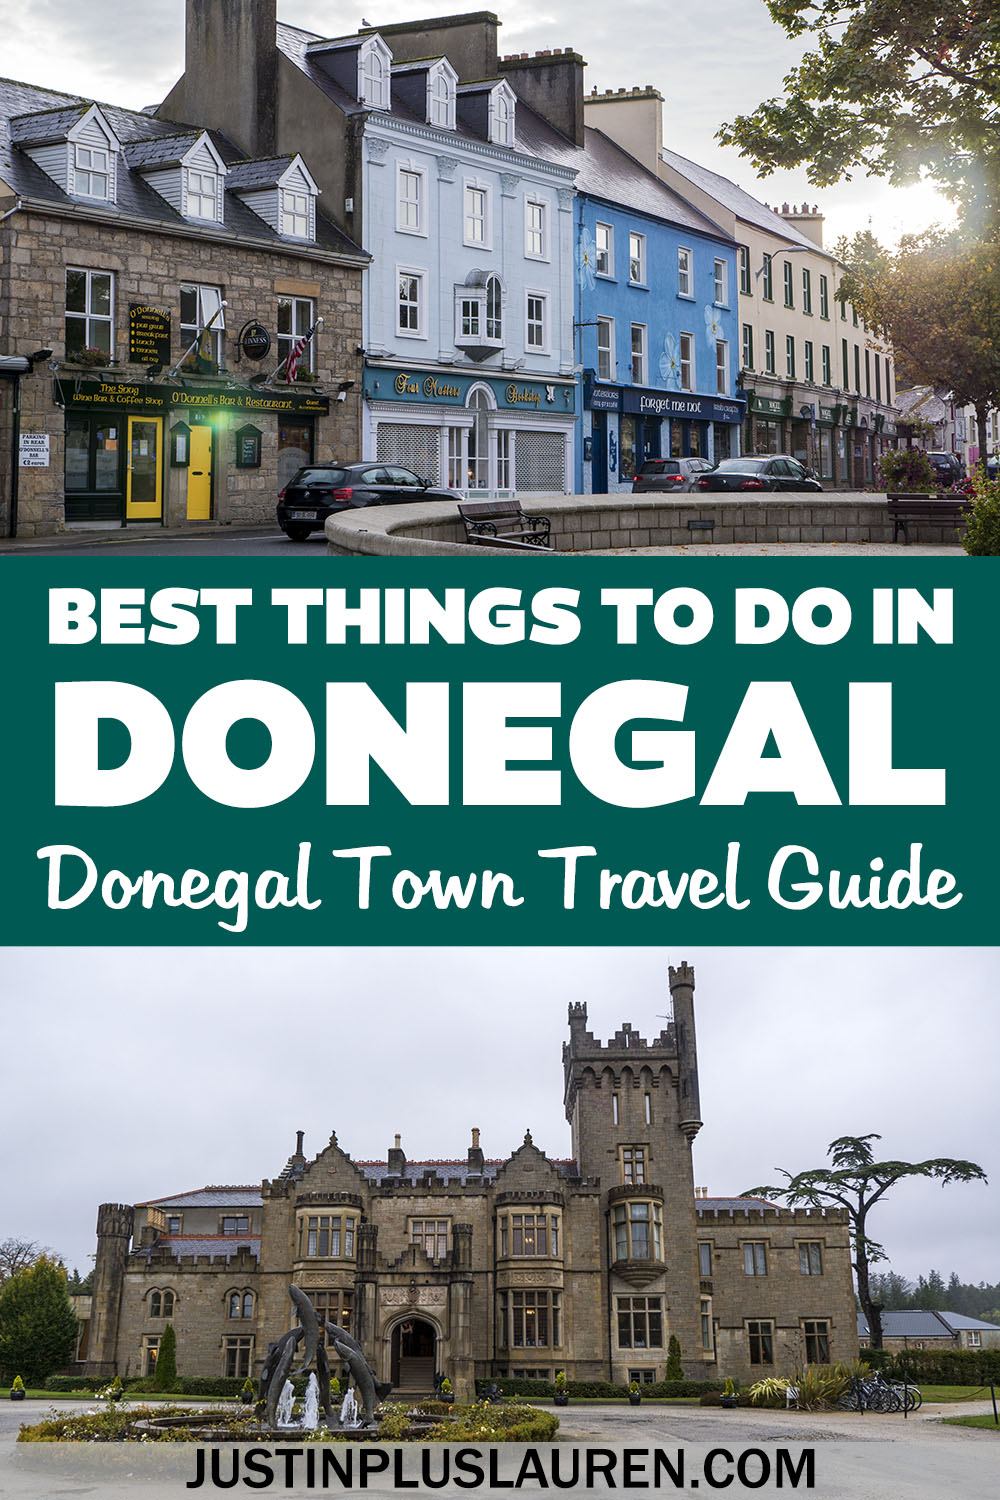 Here are the best things to do in Donegal Town in County Donegal, Ireland. This is the ultimate guide to visiting Donegal Town in one day.